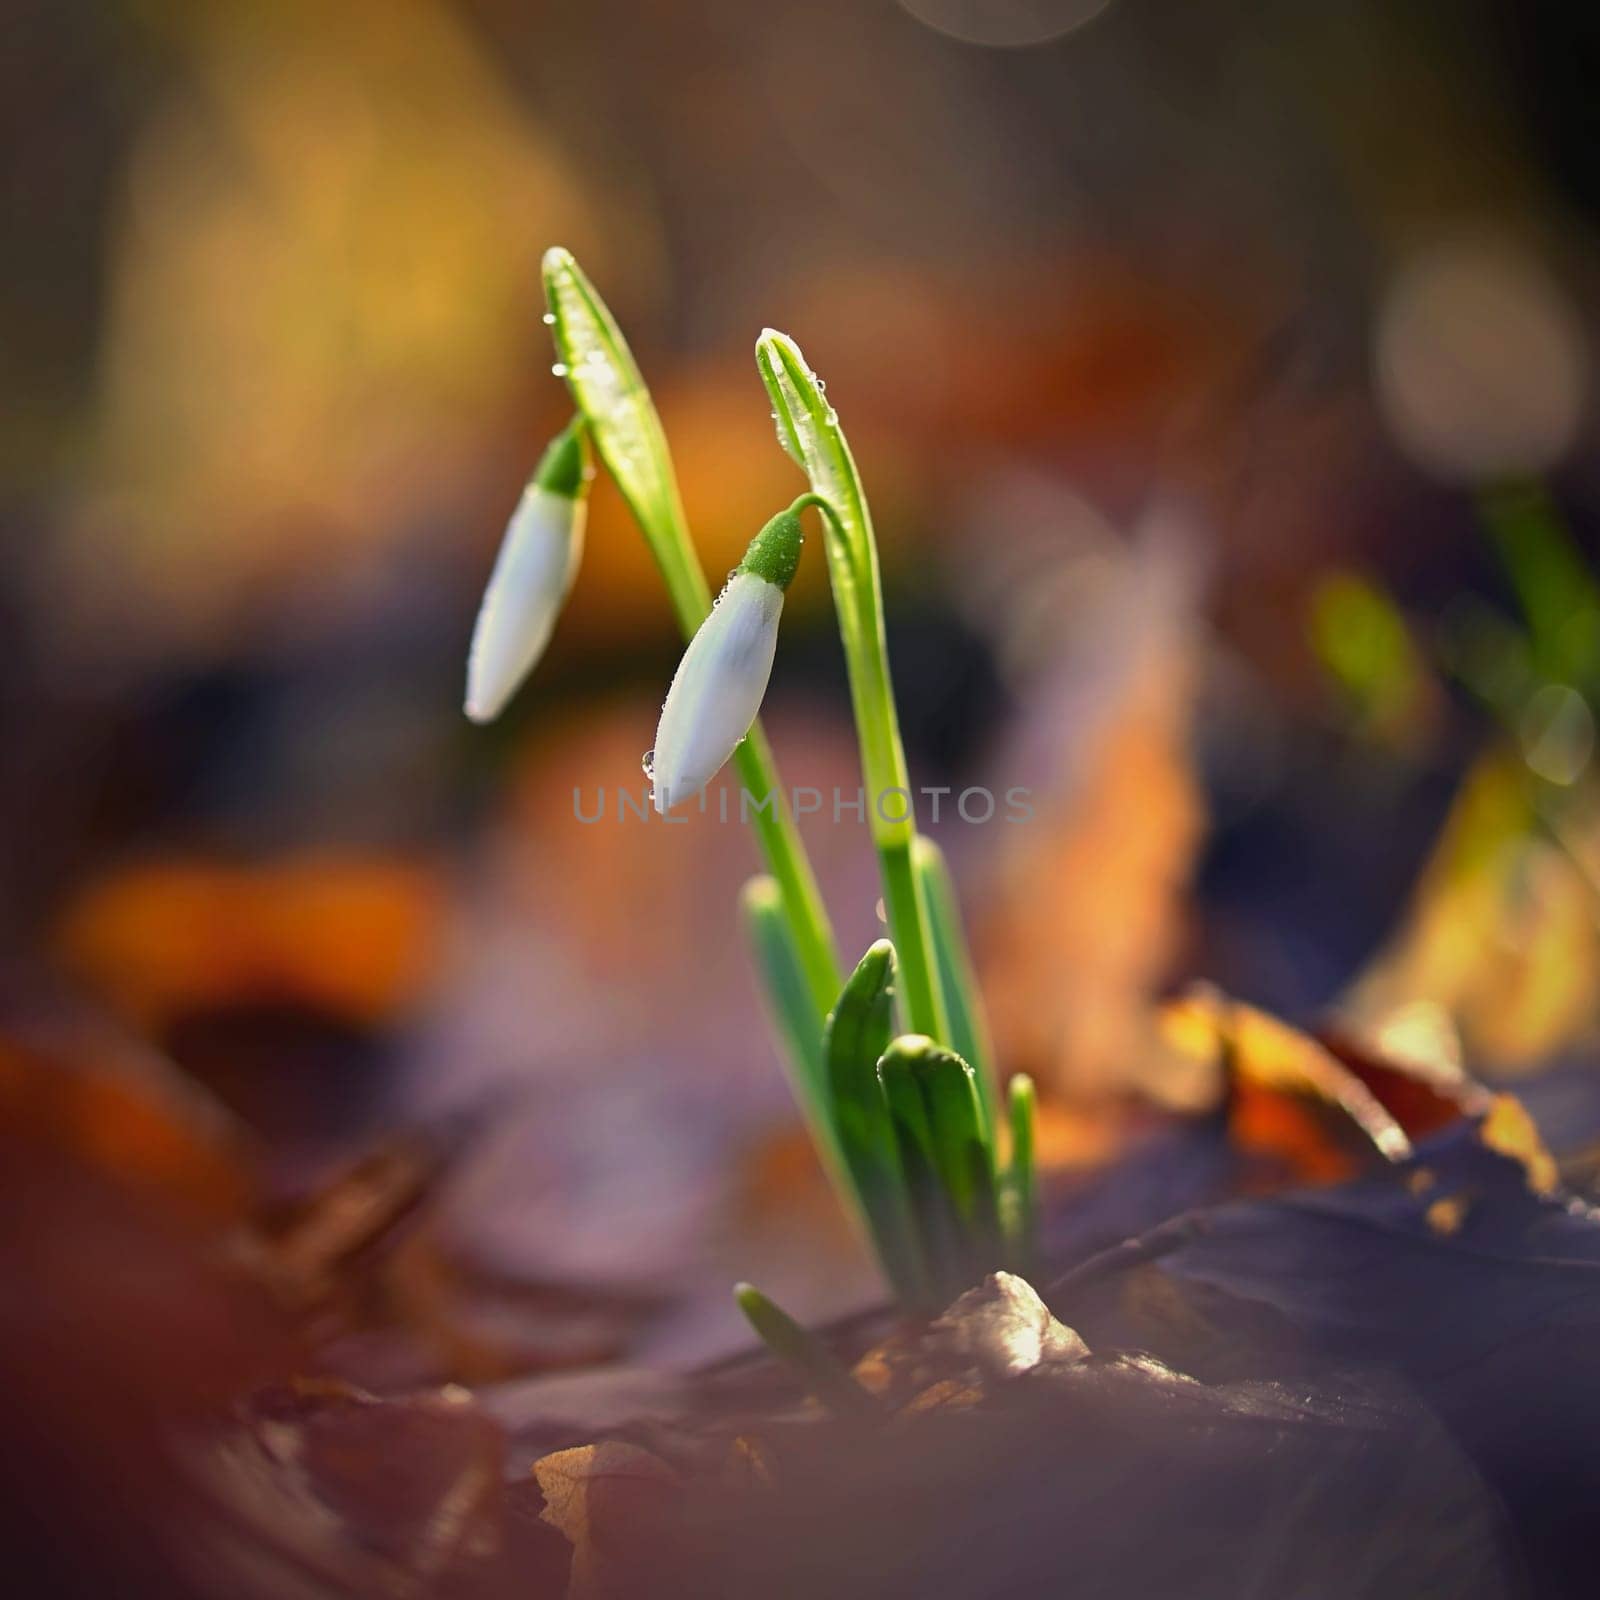 Snowdrops spring flowers. Beautifully blooming in the grass at sunset. Delicate Snowdrop flower is one of the spring symbols. (Amaryllidaceae - Galanthus nivalis) by Montypeter